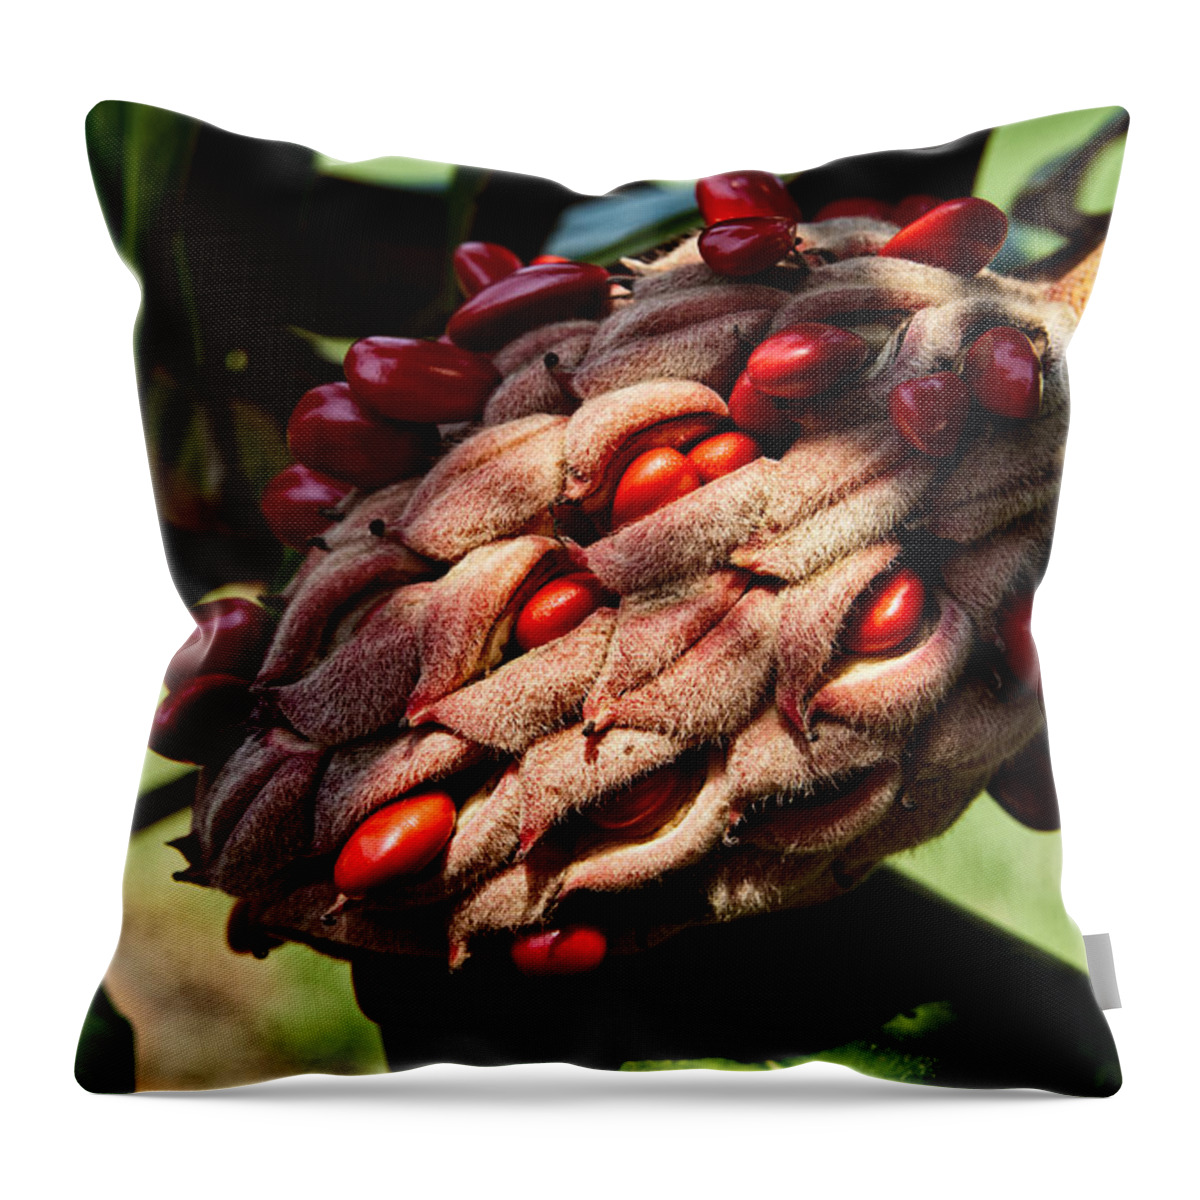 Seed Throw Pillow featuring the photograph Bursting Forth by Christopher Holmes